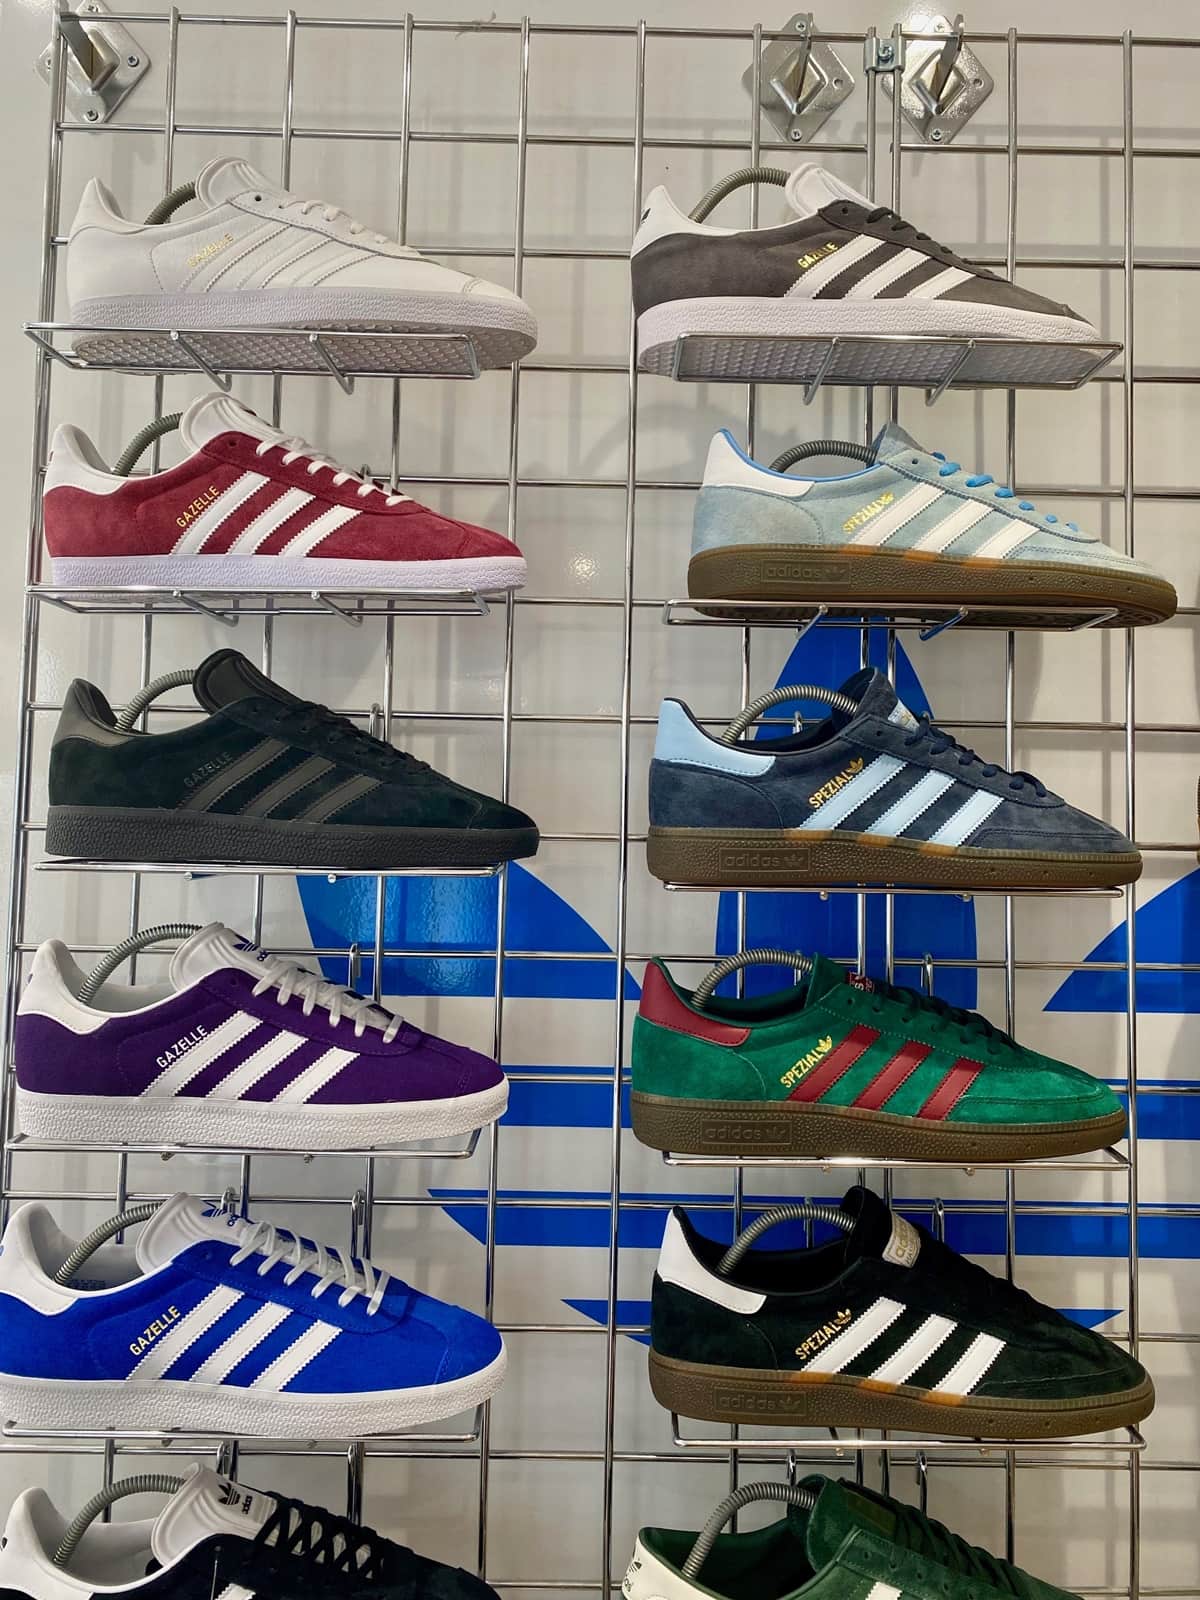 The most popular Adidas shoes include silhouettes like the Spezial, Gazelle, Superstar, Stan Smith, and Ultra Boost